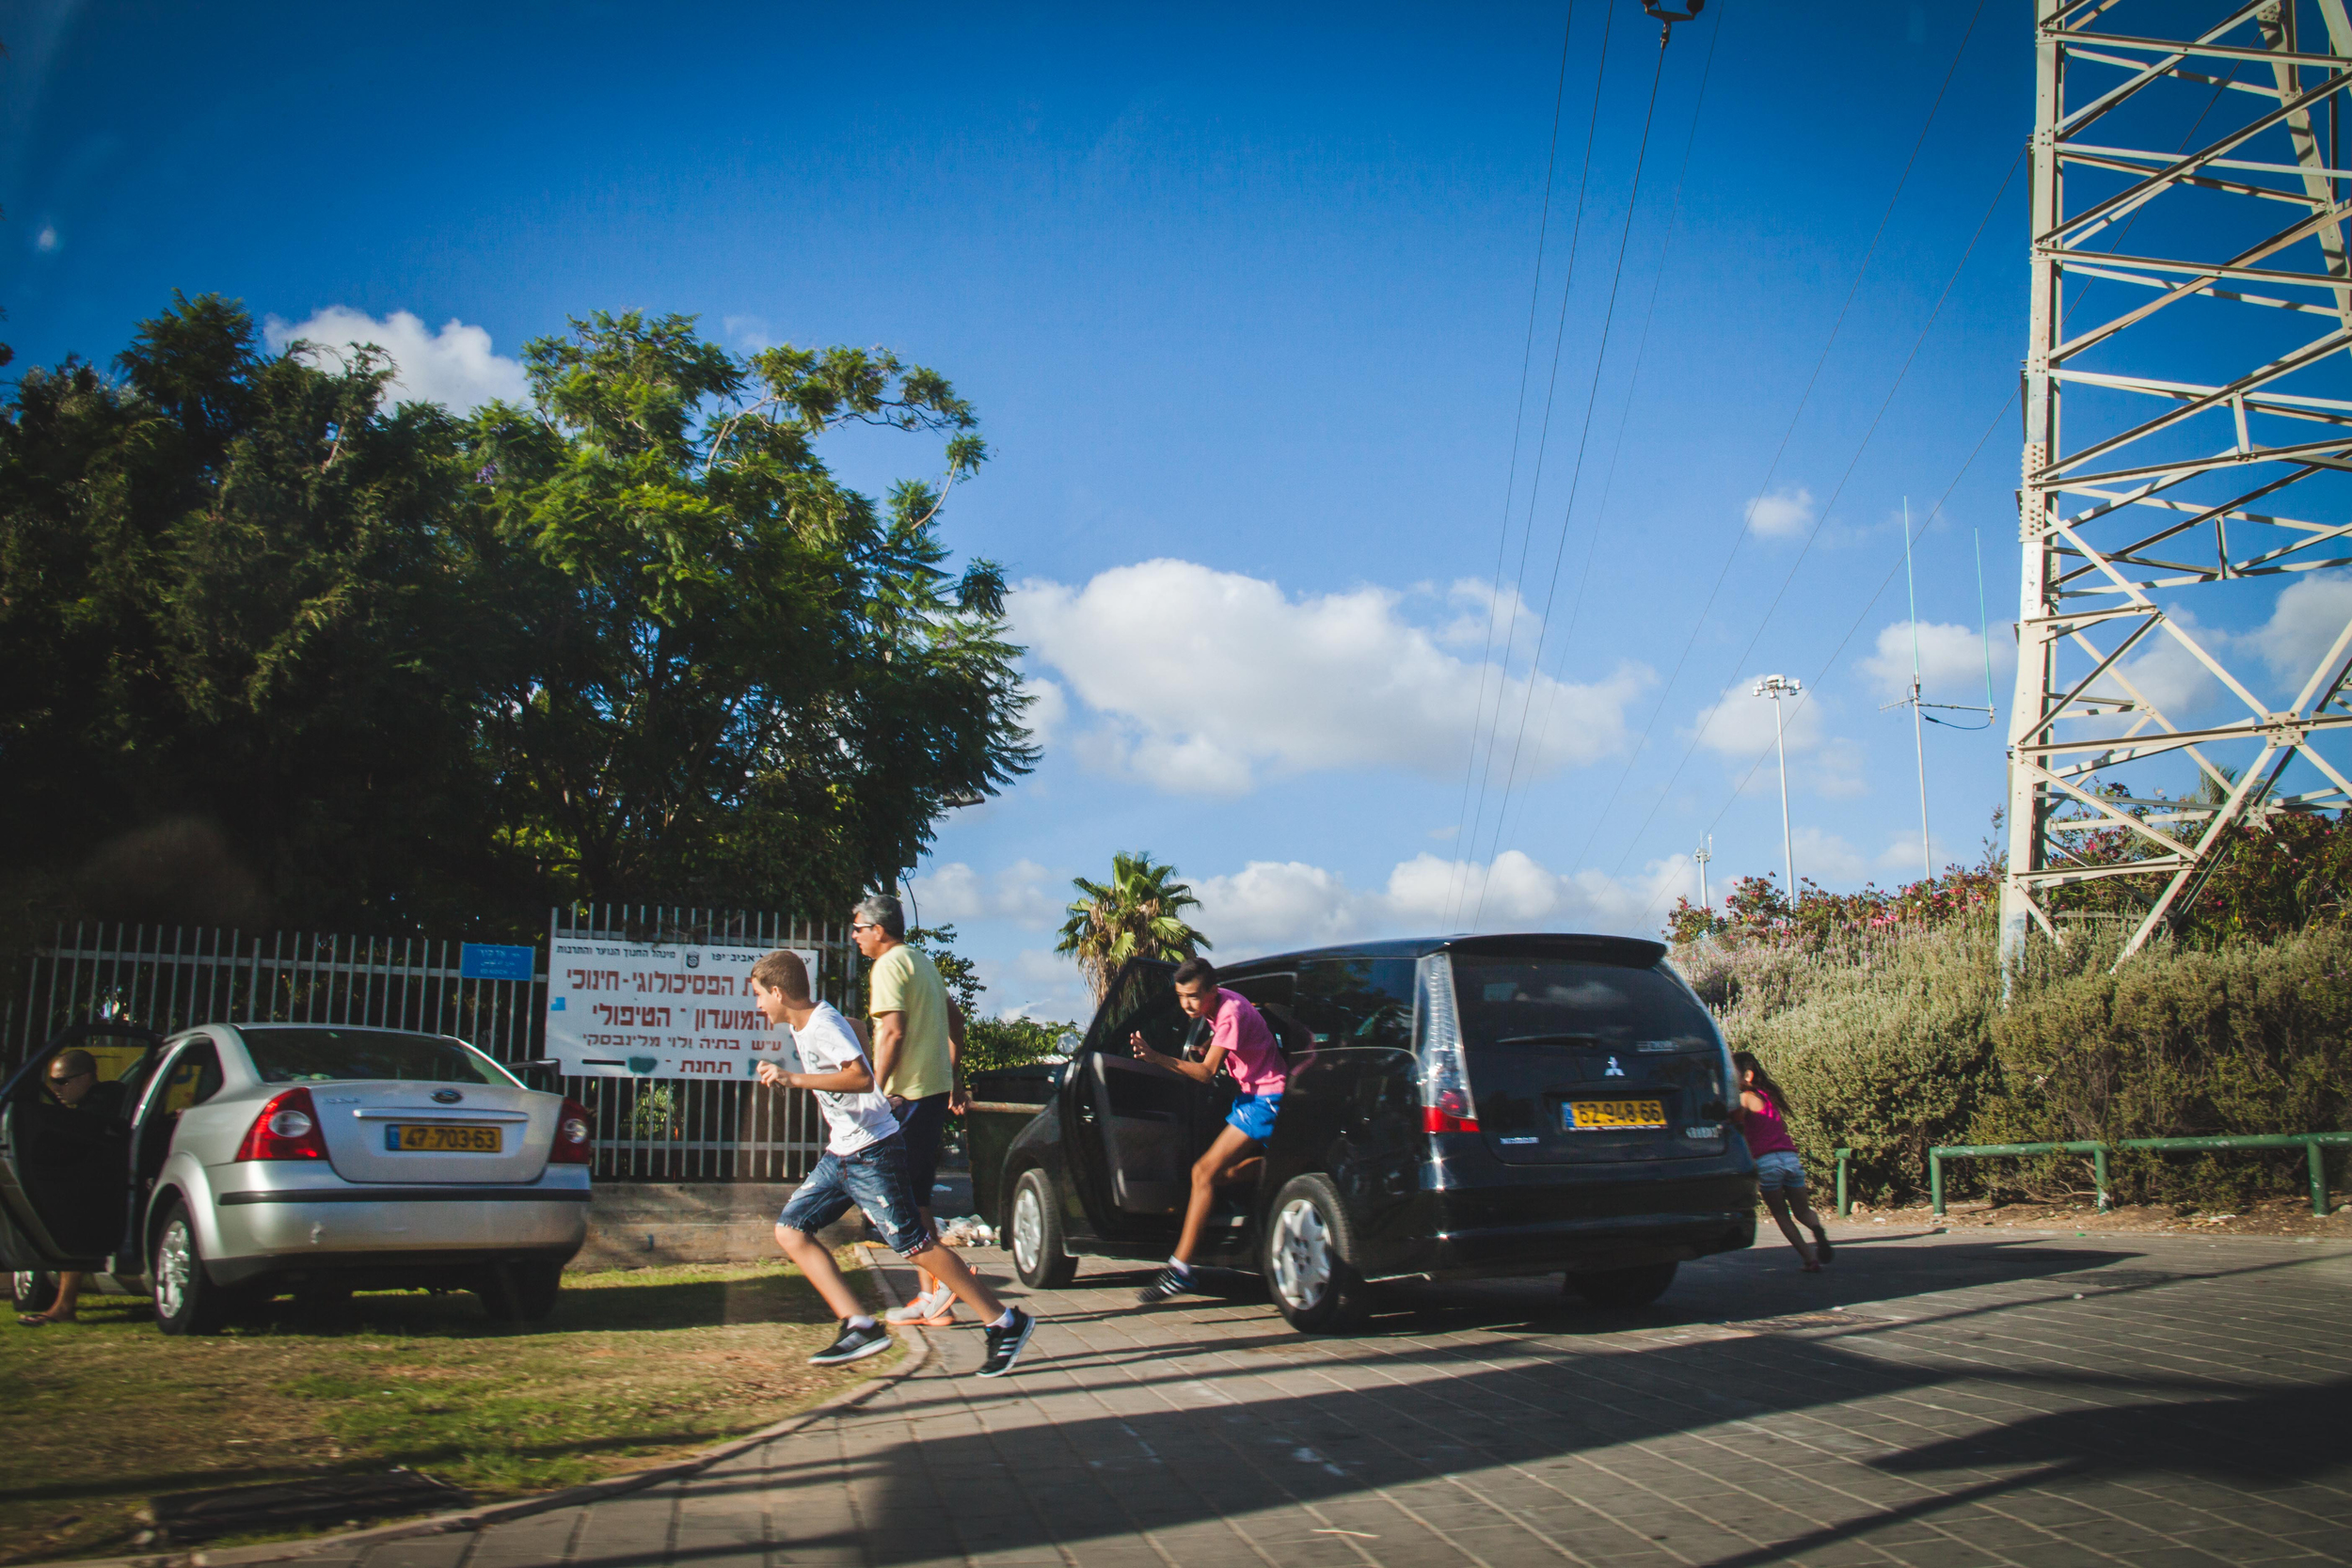  Families&nbsp;get&nbsp;out of their vehicles&nbsp;and run&nbsp;for cover as Red Alert sirens&nbsp;signaling on coming rockets from Gaza&nbsp;go off in Tel Aviv during Operation Protective Edge.&nbsp; 